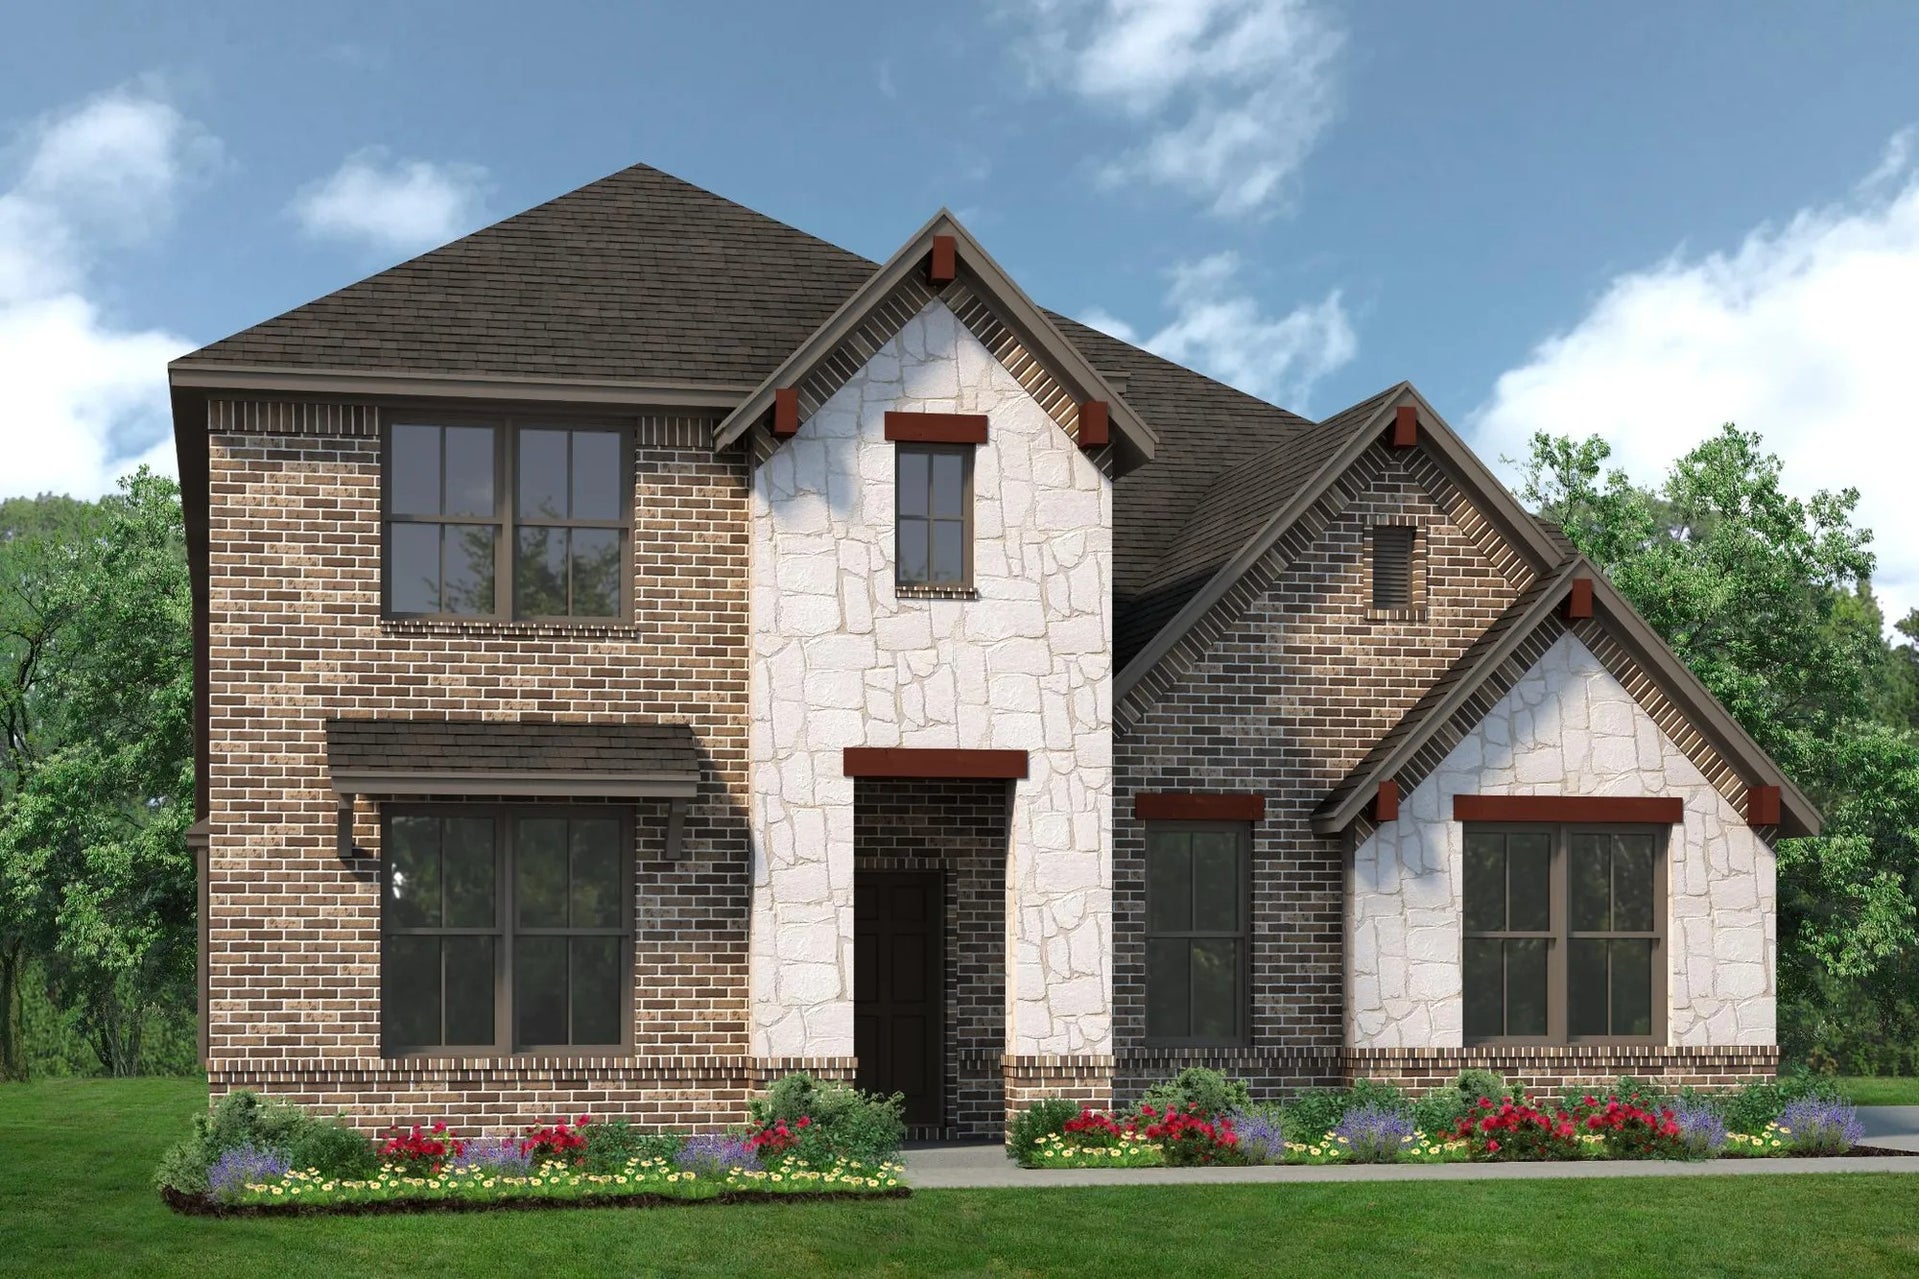 2870 B with Stone Outswing. Concept 2870 Home with 4 Bedrooms